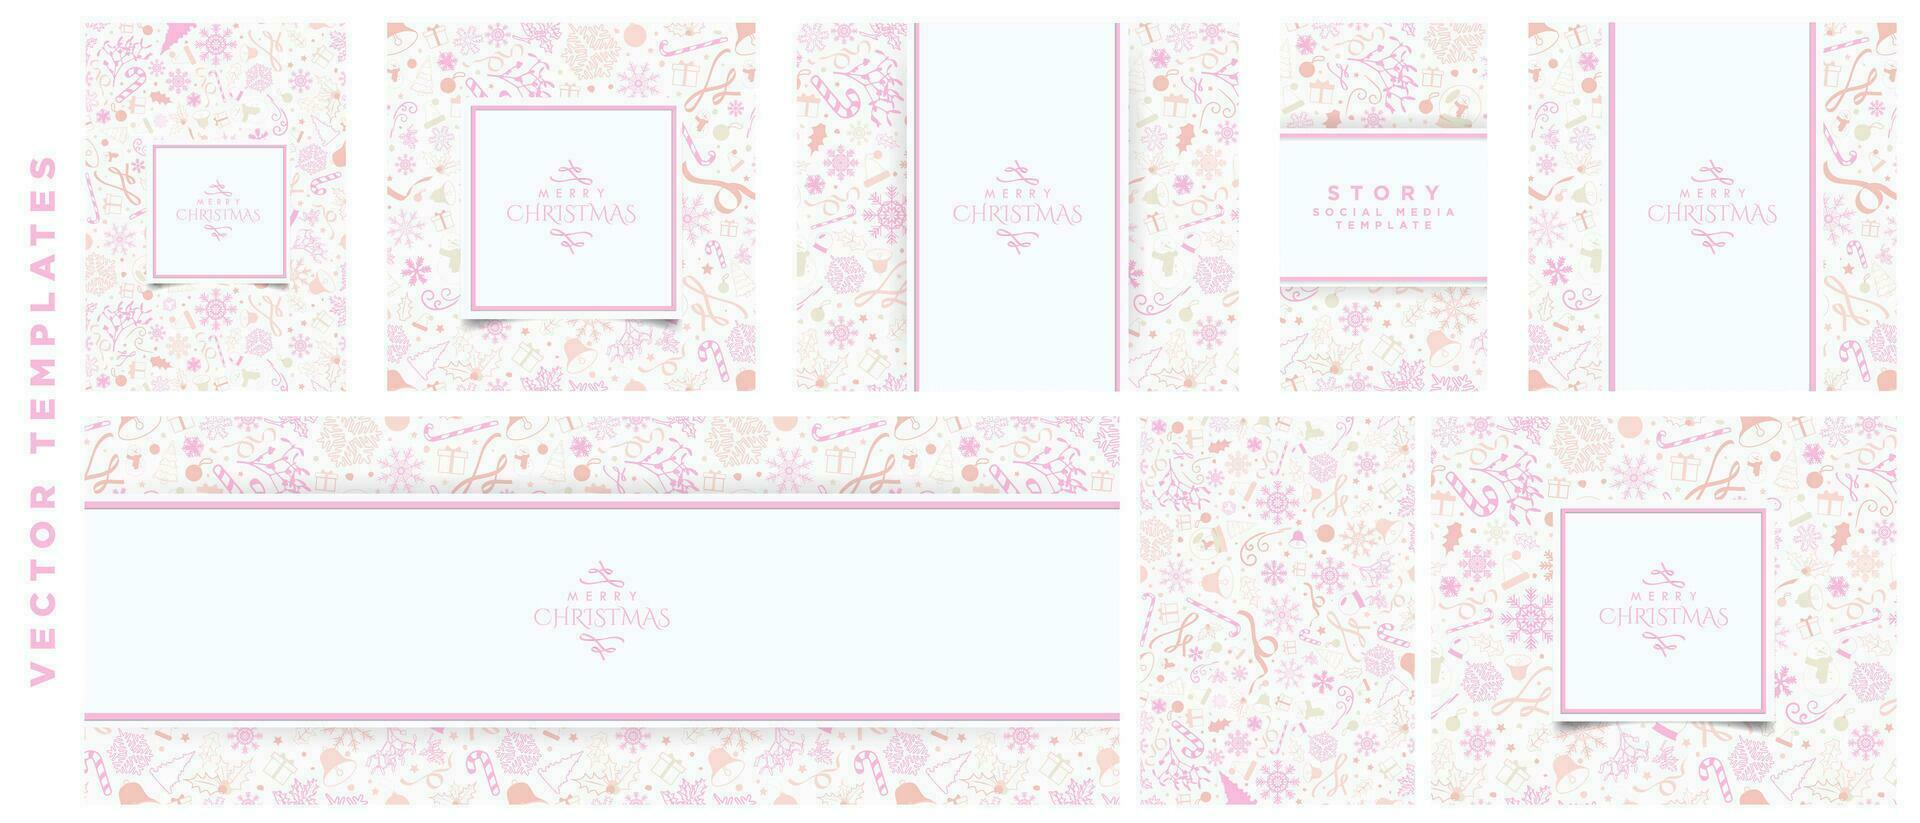 White Christmas Background Collection Designs. Beautiful White Christmas Themed Templates with Christmas elements in pink, yellow, peach, magenta. A4 Posters, Greeting Cards, Banners, Story. EPS 10. vector